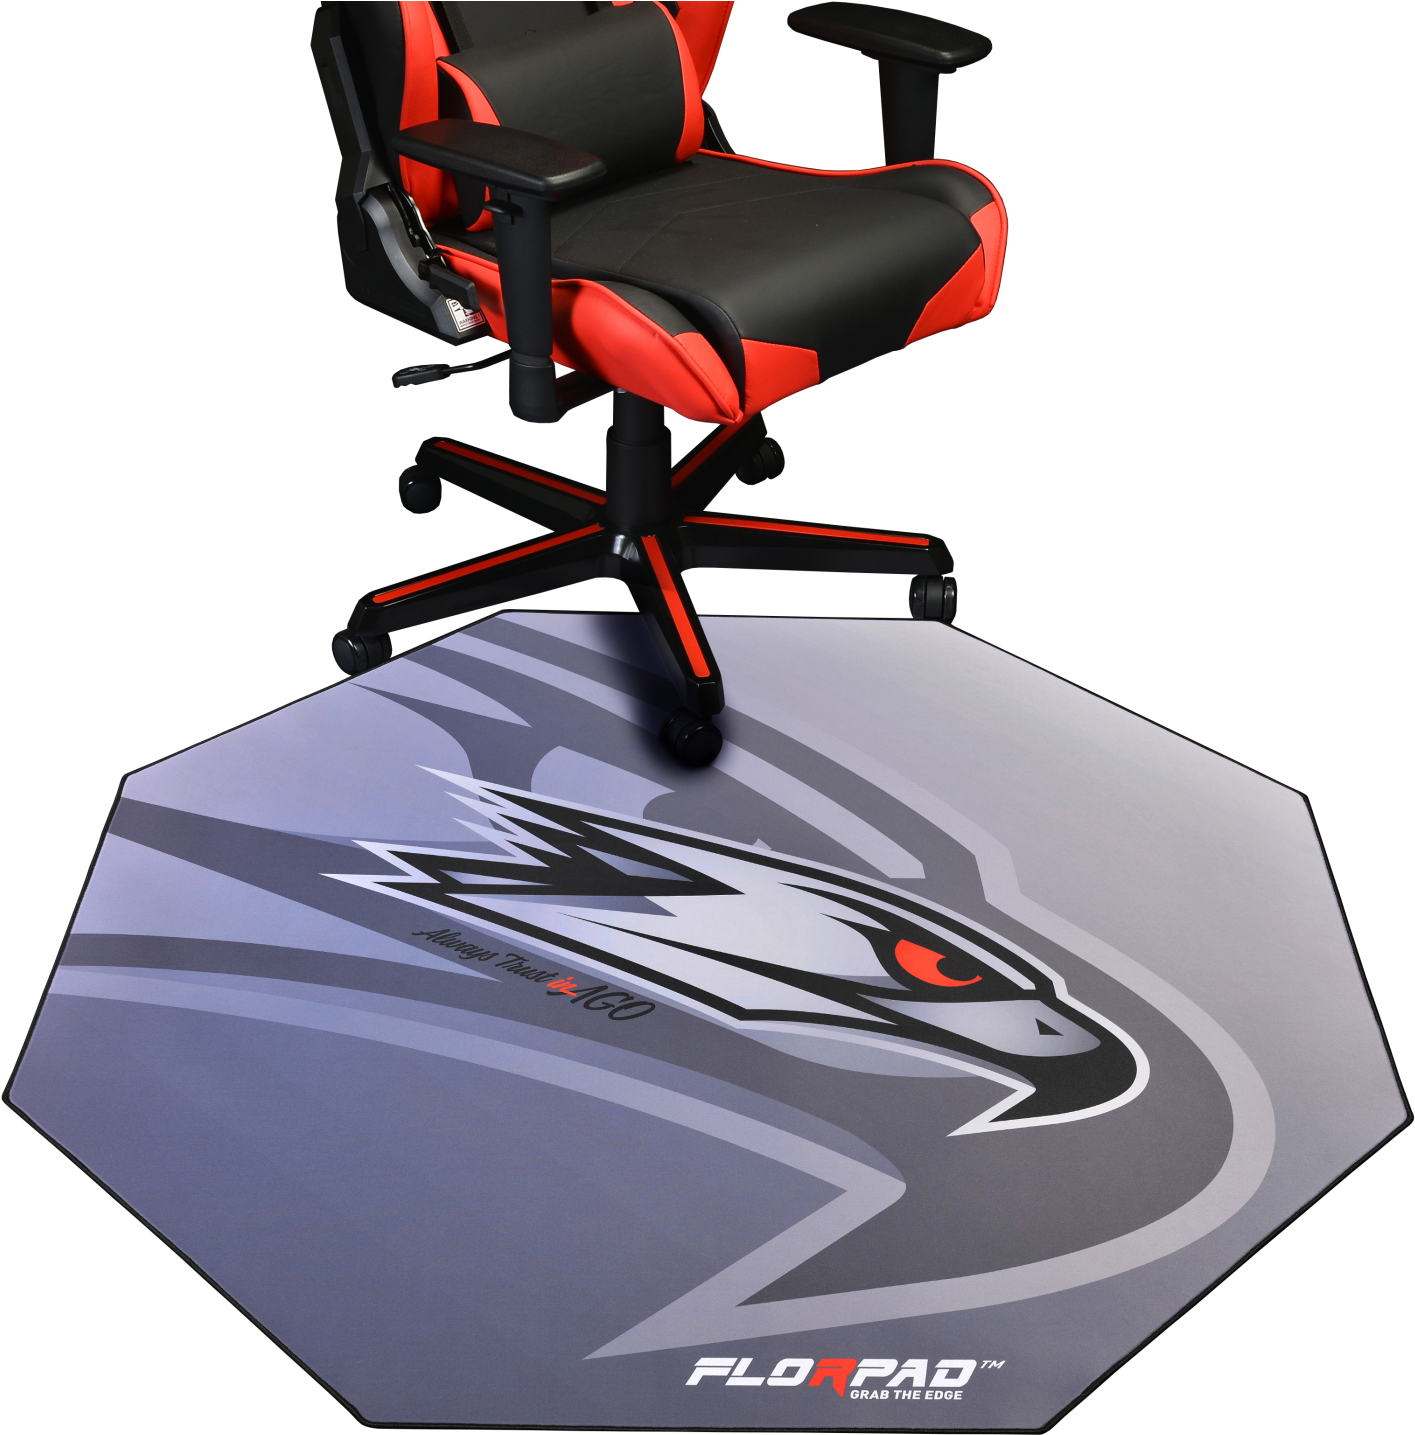 Redand Black Gaming Chairon Floor Mat PNG image